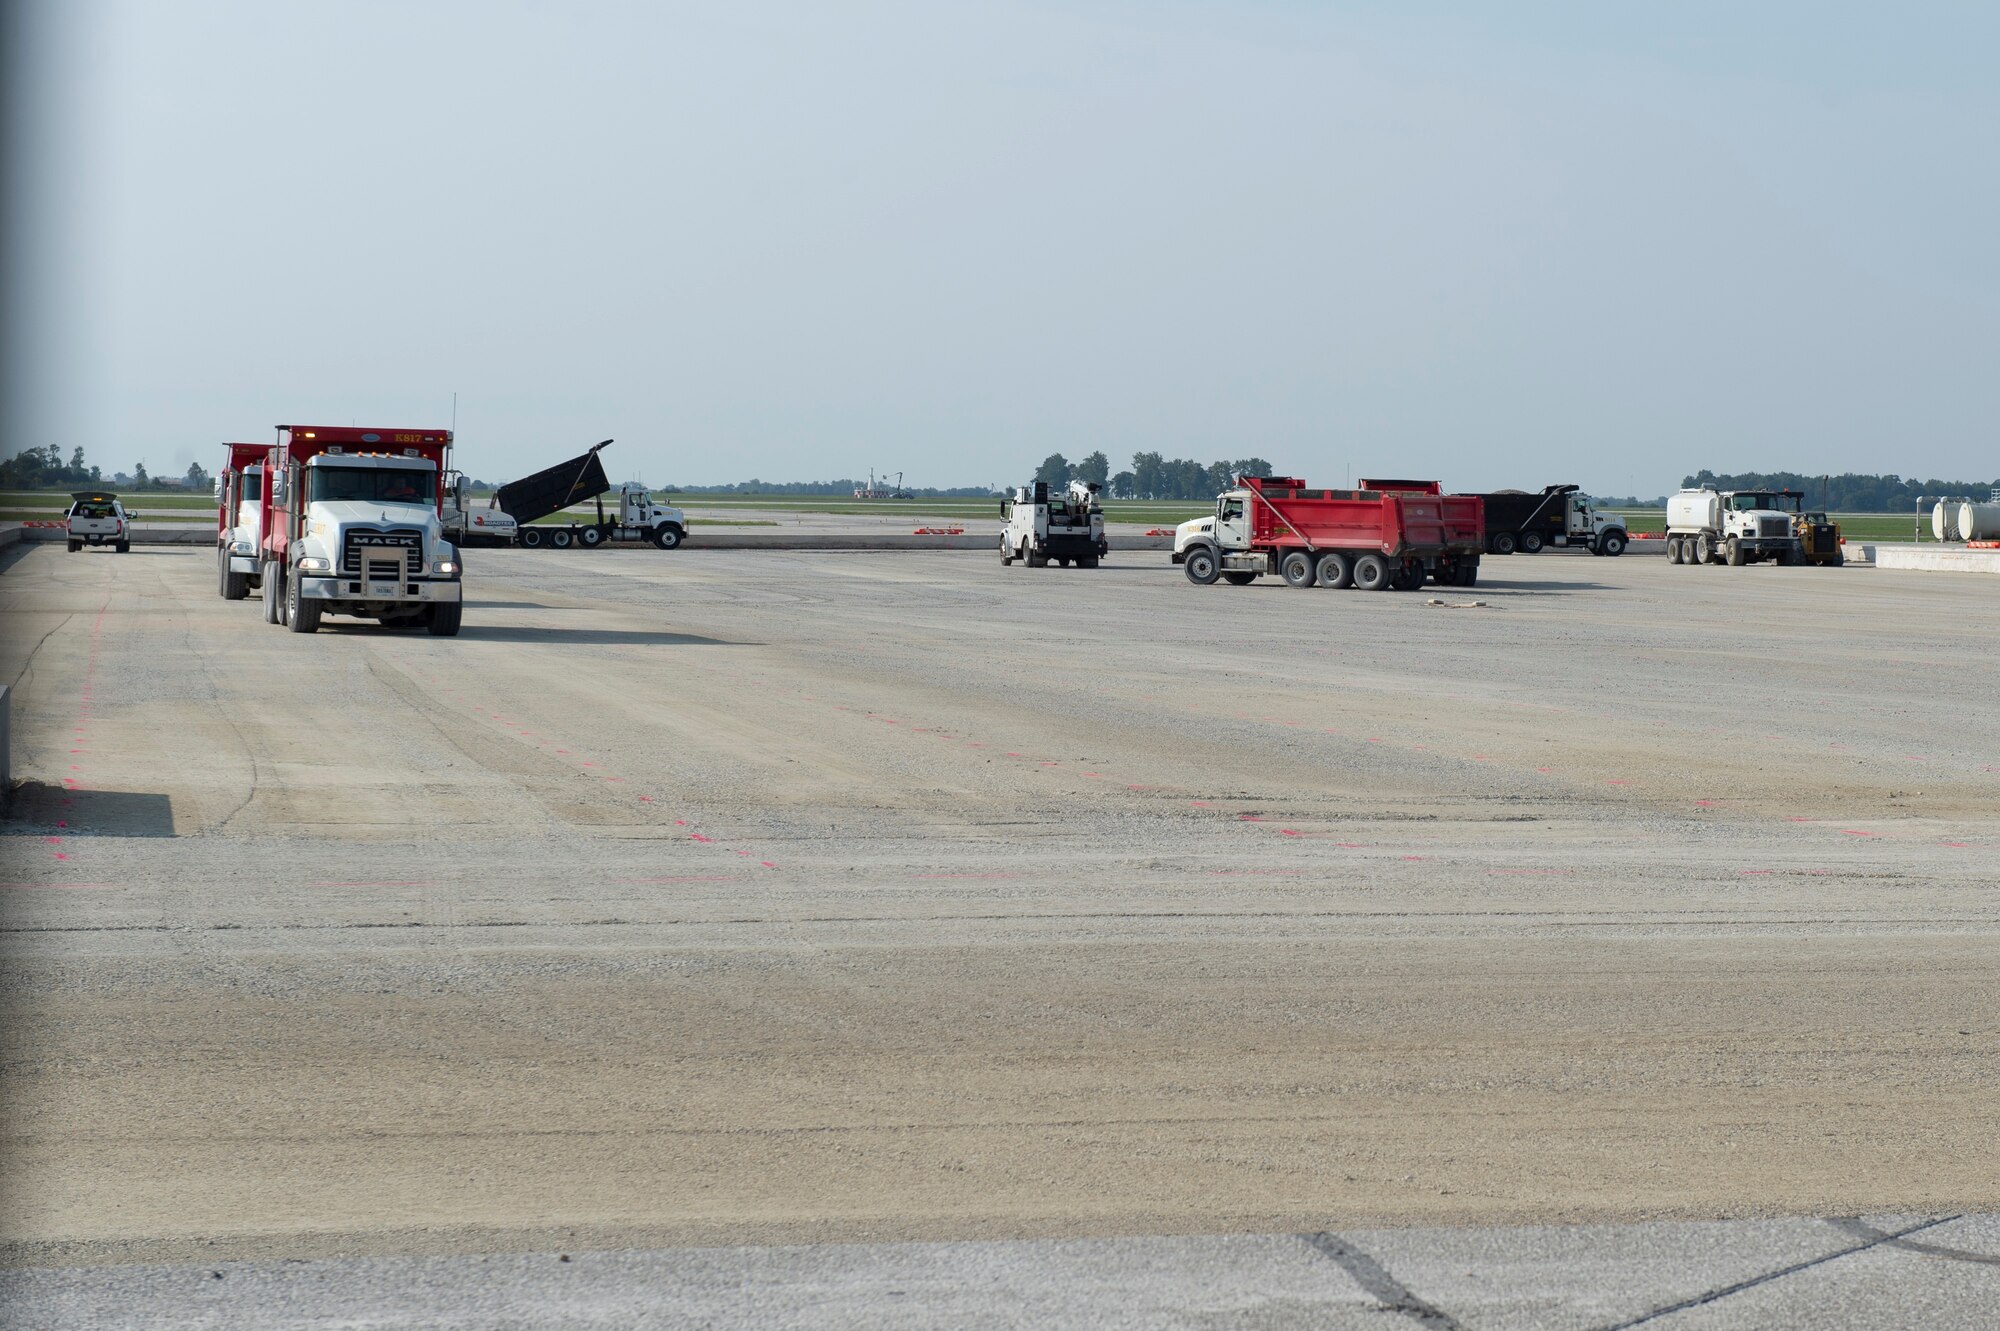 Dump trucks remove old concrete from the flightline at Grissom Air Reserve Base, Indiana, Sept. 23, 2020. The part of the flightline needed to be replaced as part of its routine structural maintenance. (U.S. Air Force photo by Staff Sgt. Michael Hunsaker)